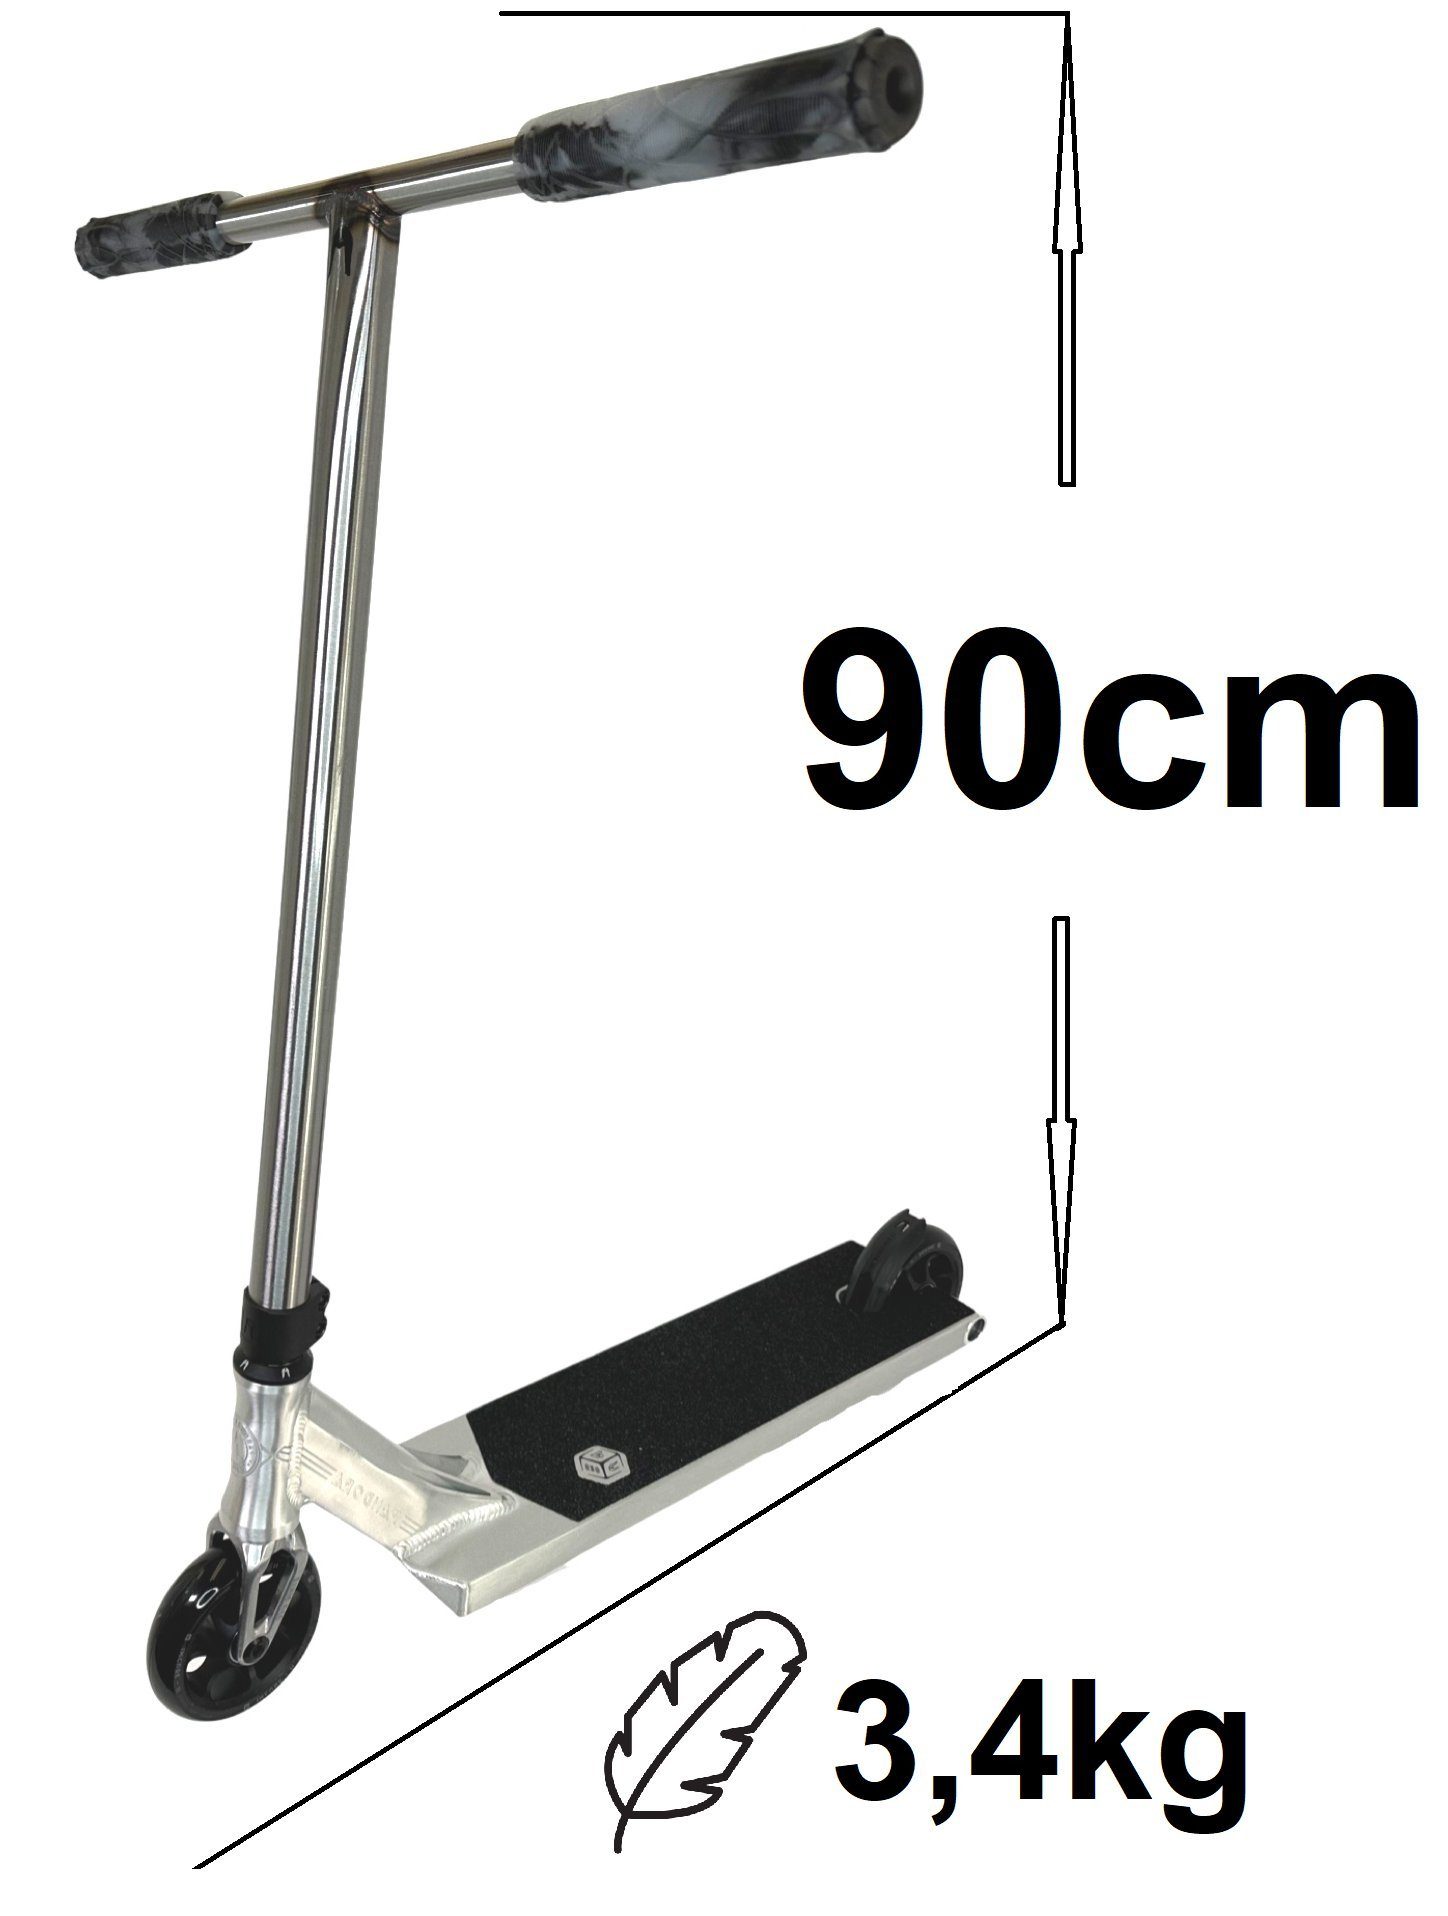 Silber Stuntscooter Ethic Stunt-Scooter 3,4kg DTC Pandora L Ethic DTC H=90cm